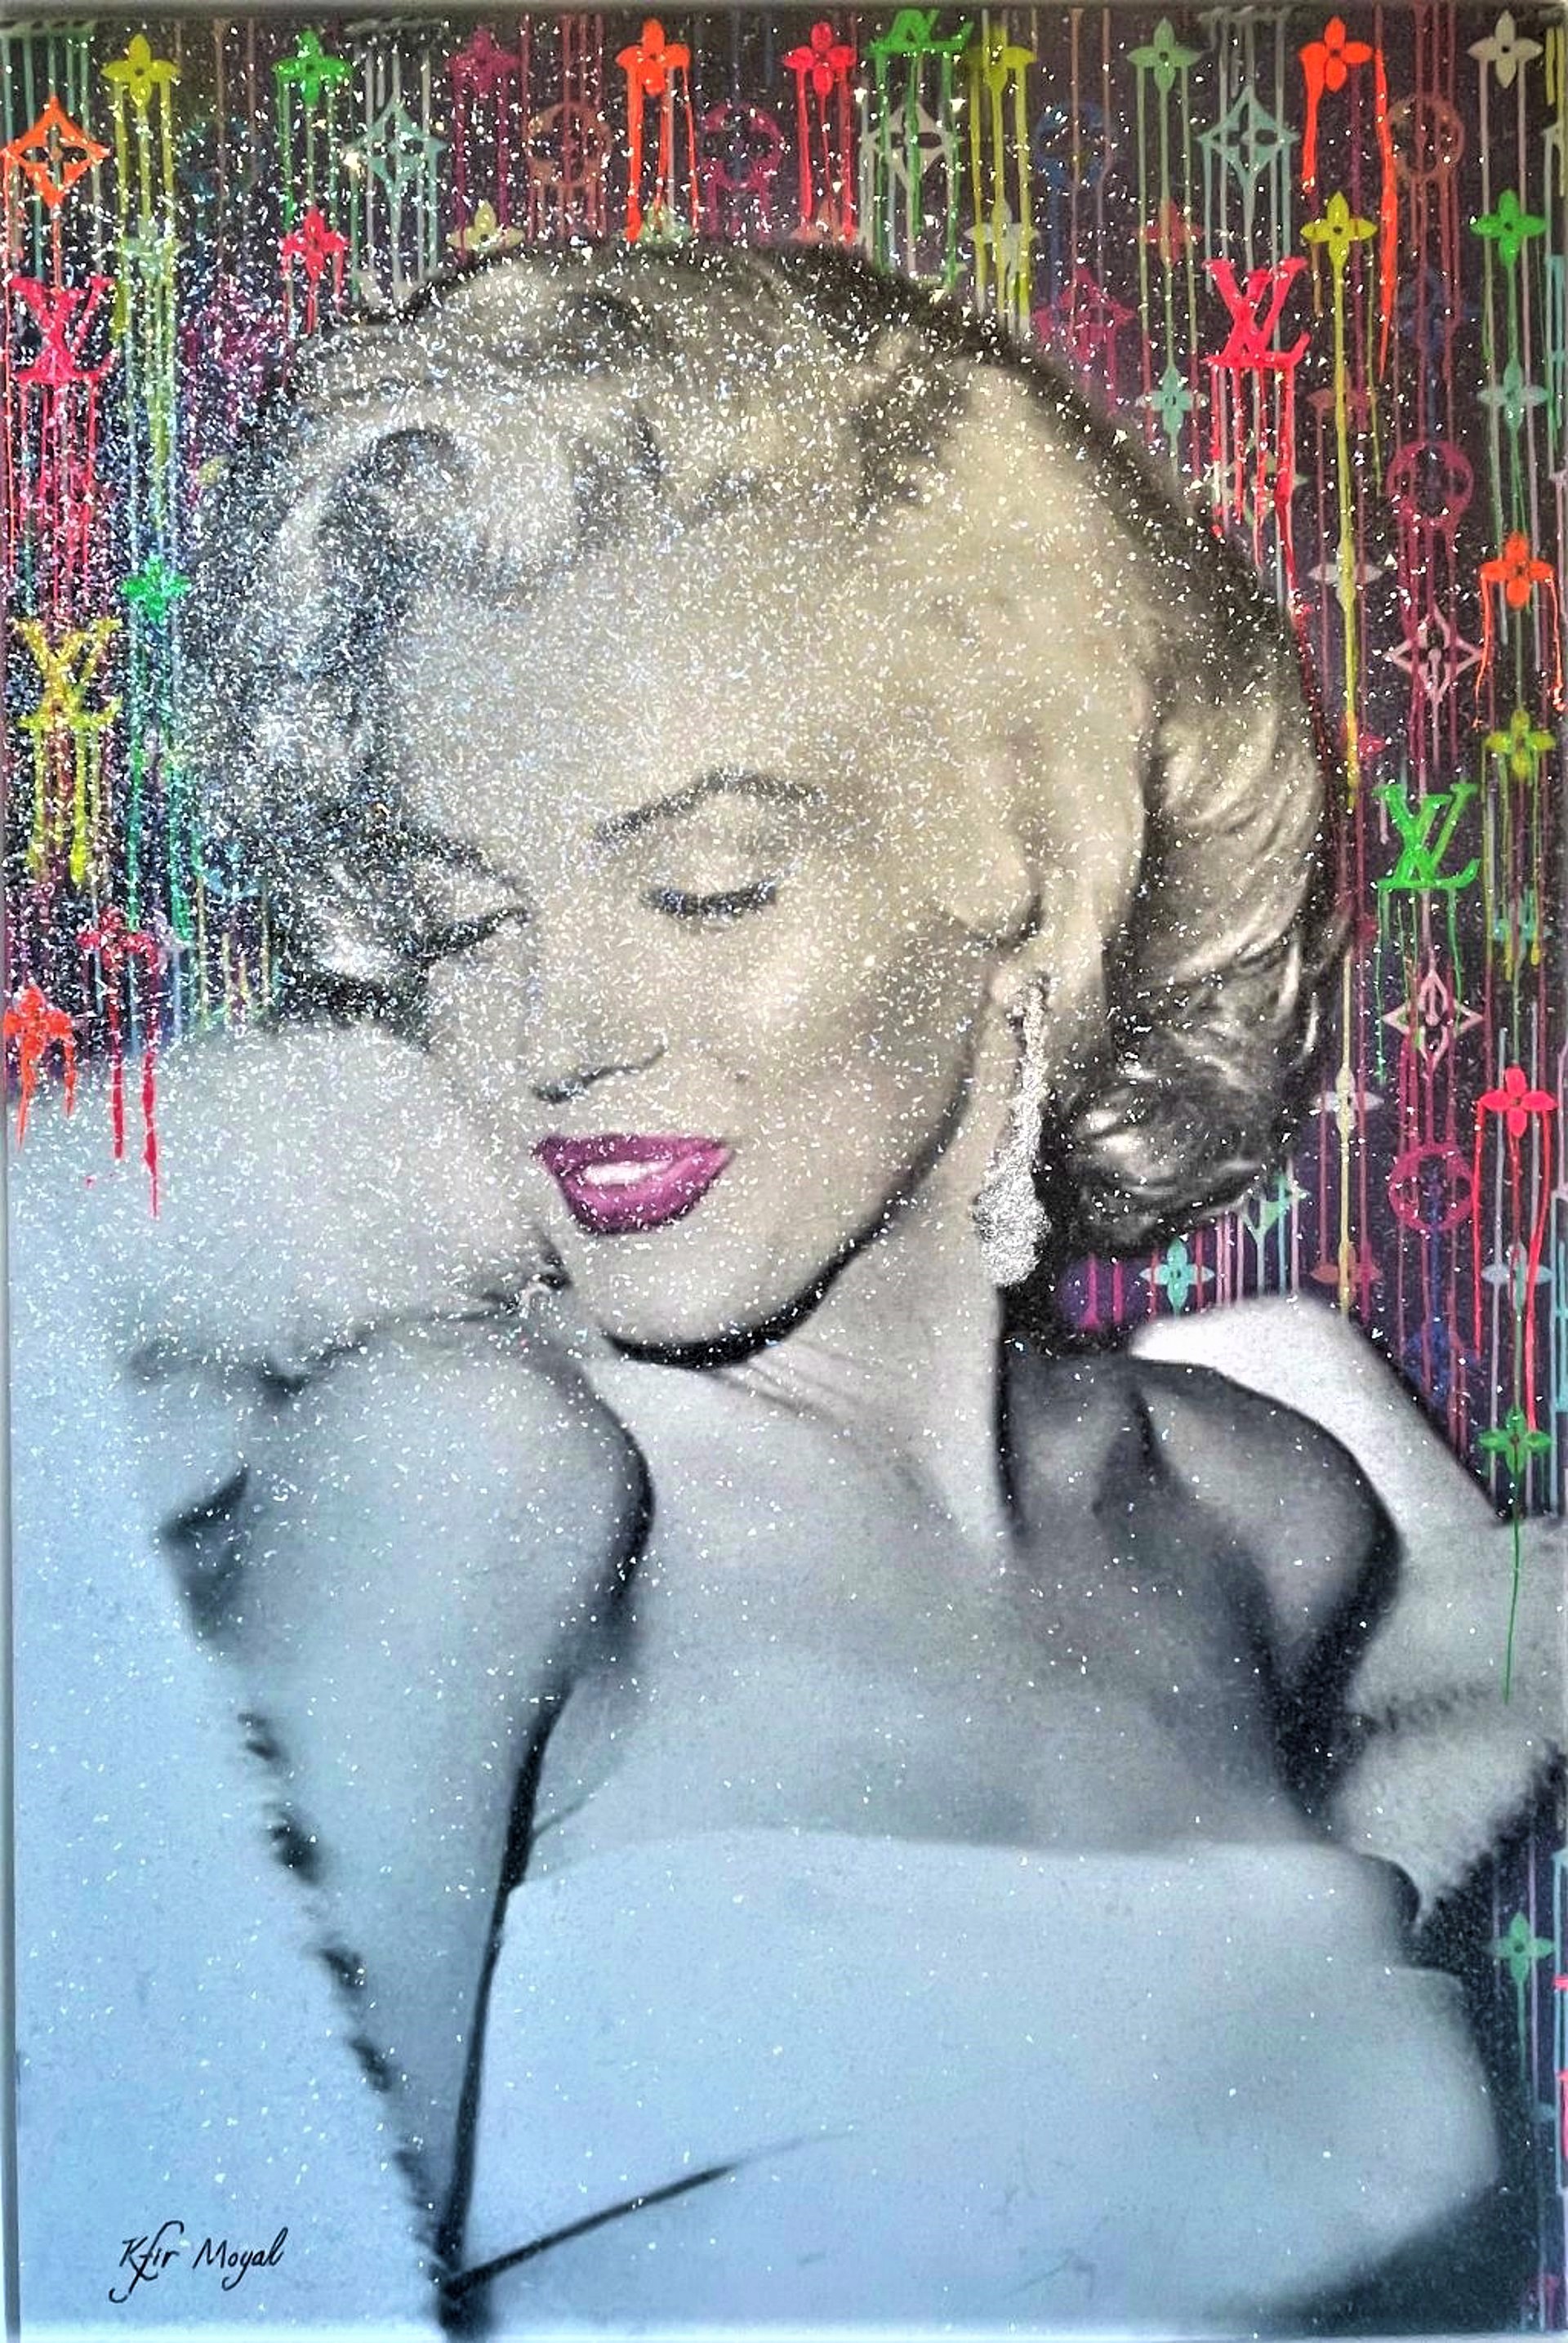 Large Marilyn with Louis Vuitton by Kfir Moyal